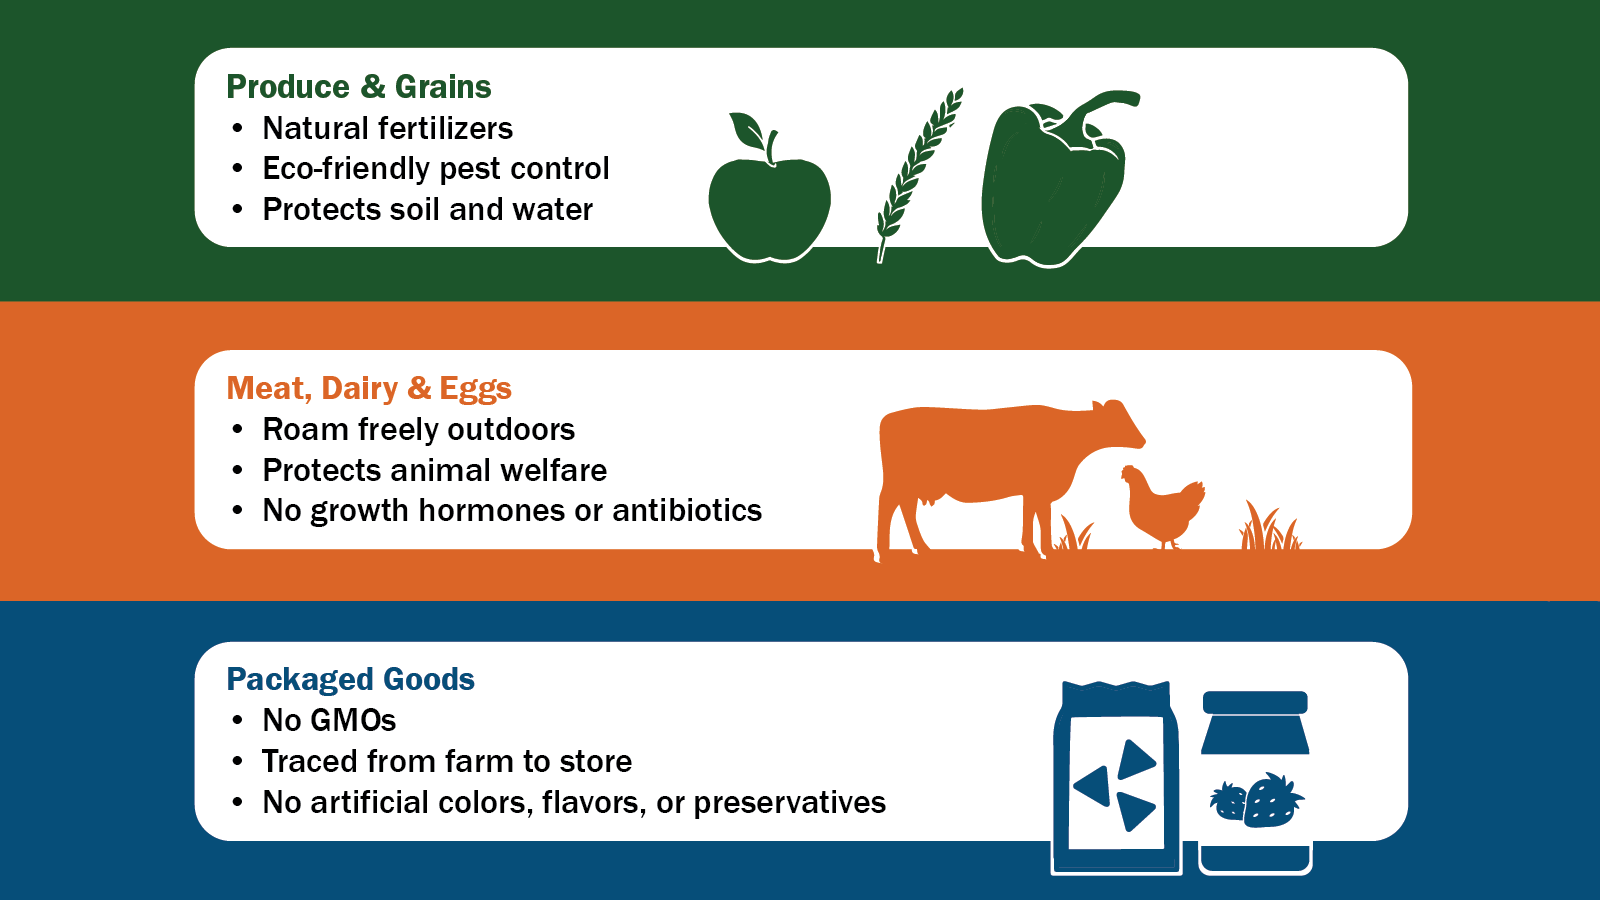 Produce and Grains - Natural Fertilizers, Eco-friendly pest control, Protects soil and water. Meat, Dairy and Eggs: Roam freely outdoors, Protects animal welfare, no growth hormones or antibiotics. Packaged Goods - No GMOs, Traced from farm to store, No artificial colors, flavors, or preservatives.